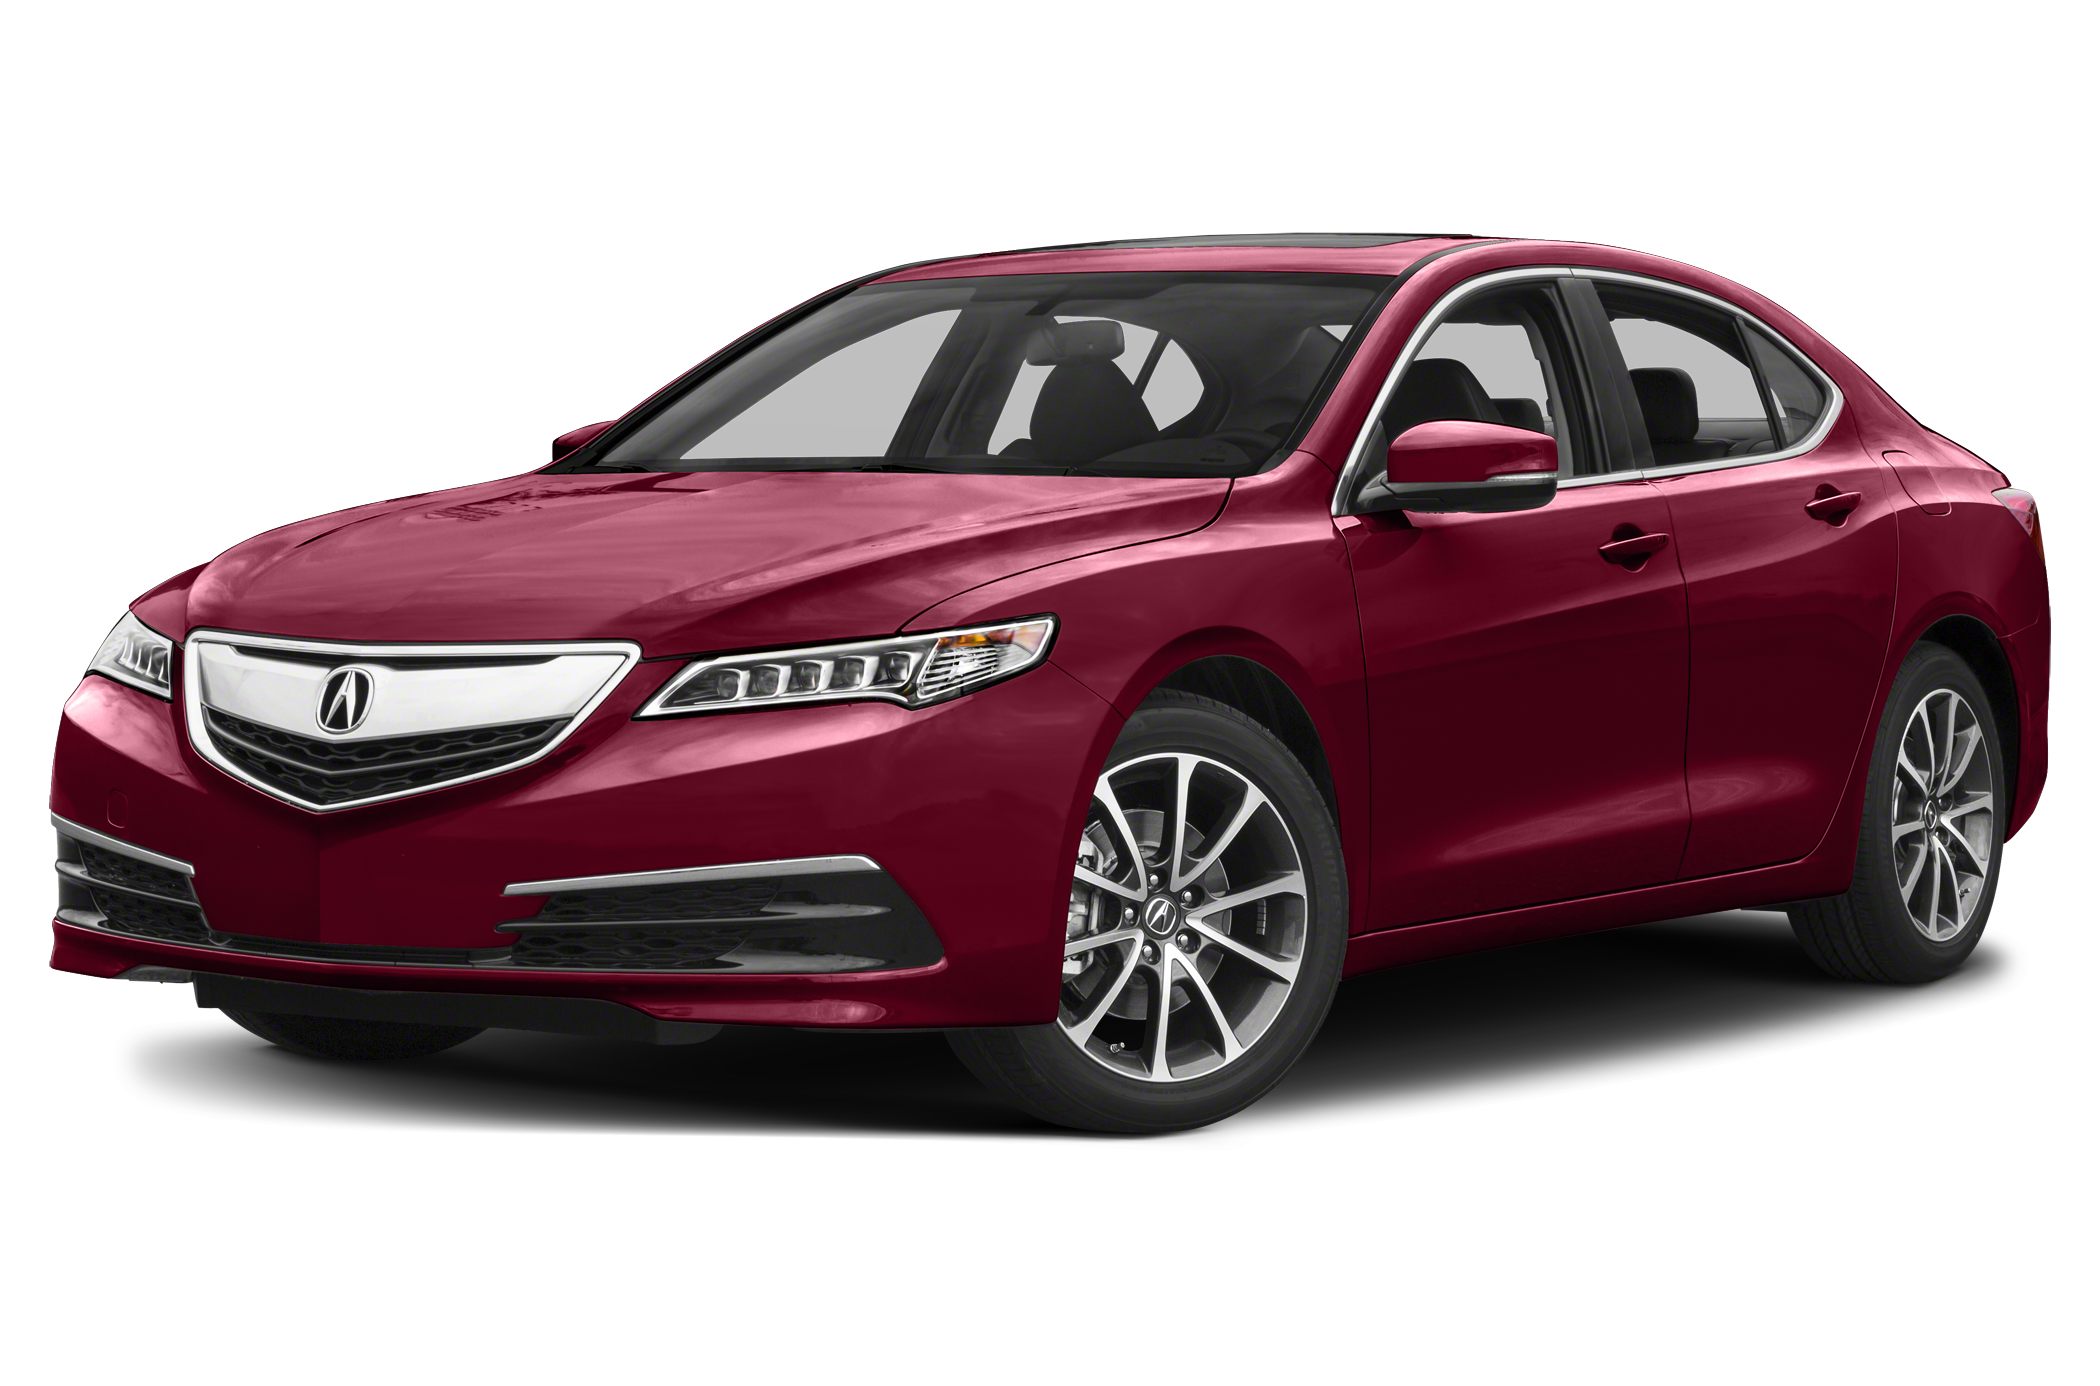 2017 Acura Tlx V6 4dr Front Wheel Drive Sedan Pictures